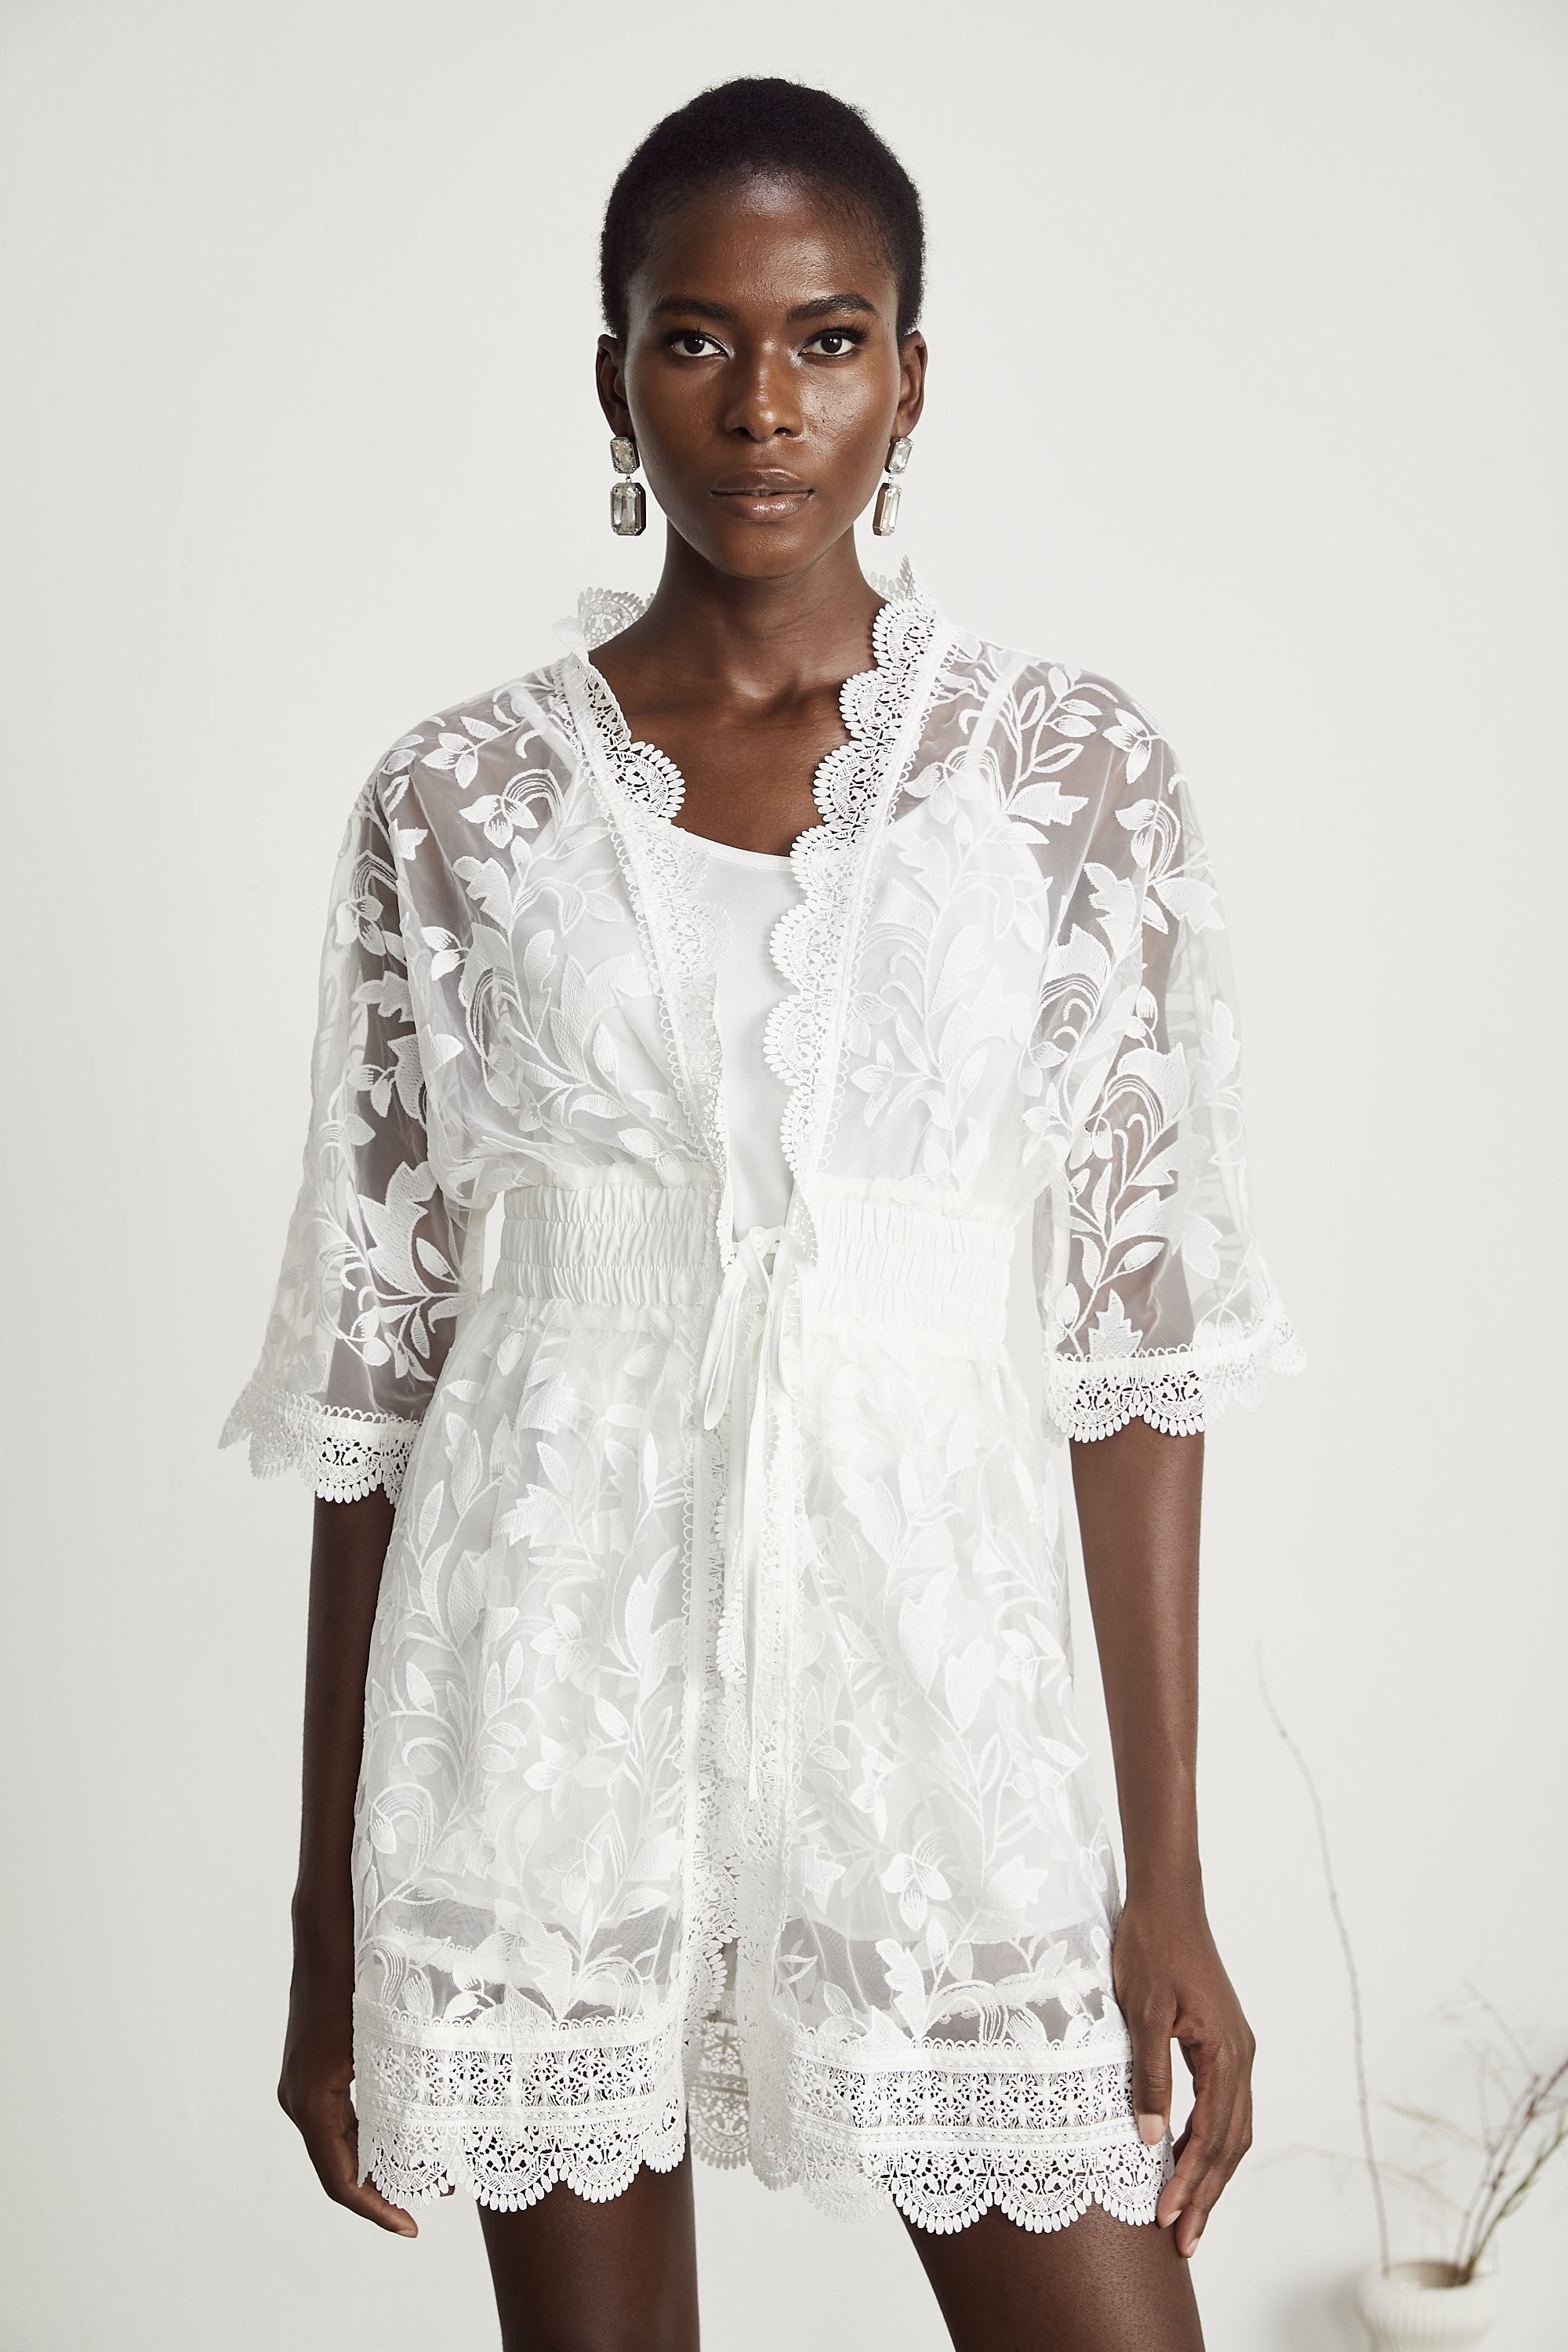 Léna semi-sheer lace embroidered top & shorts matching set